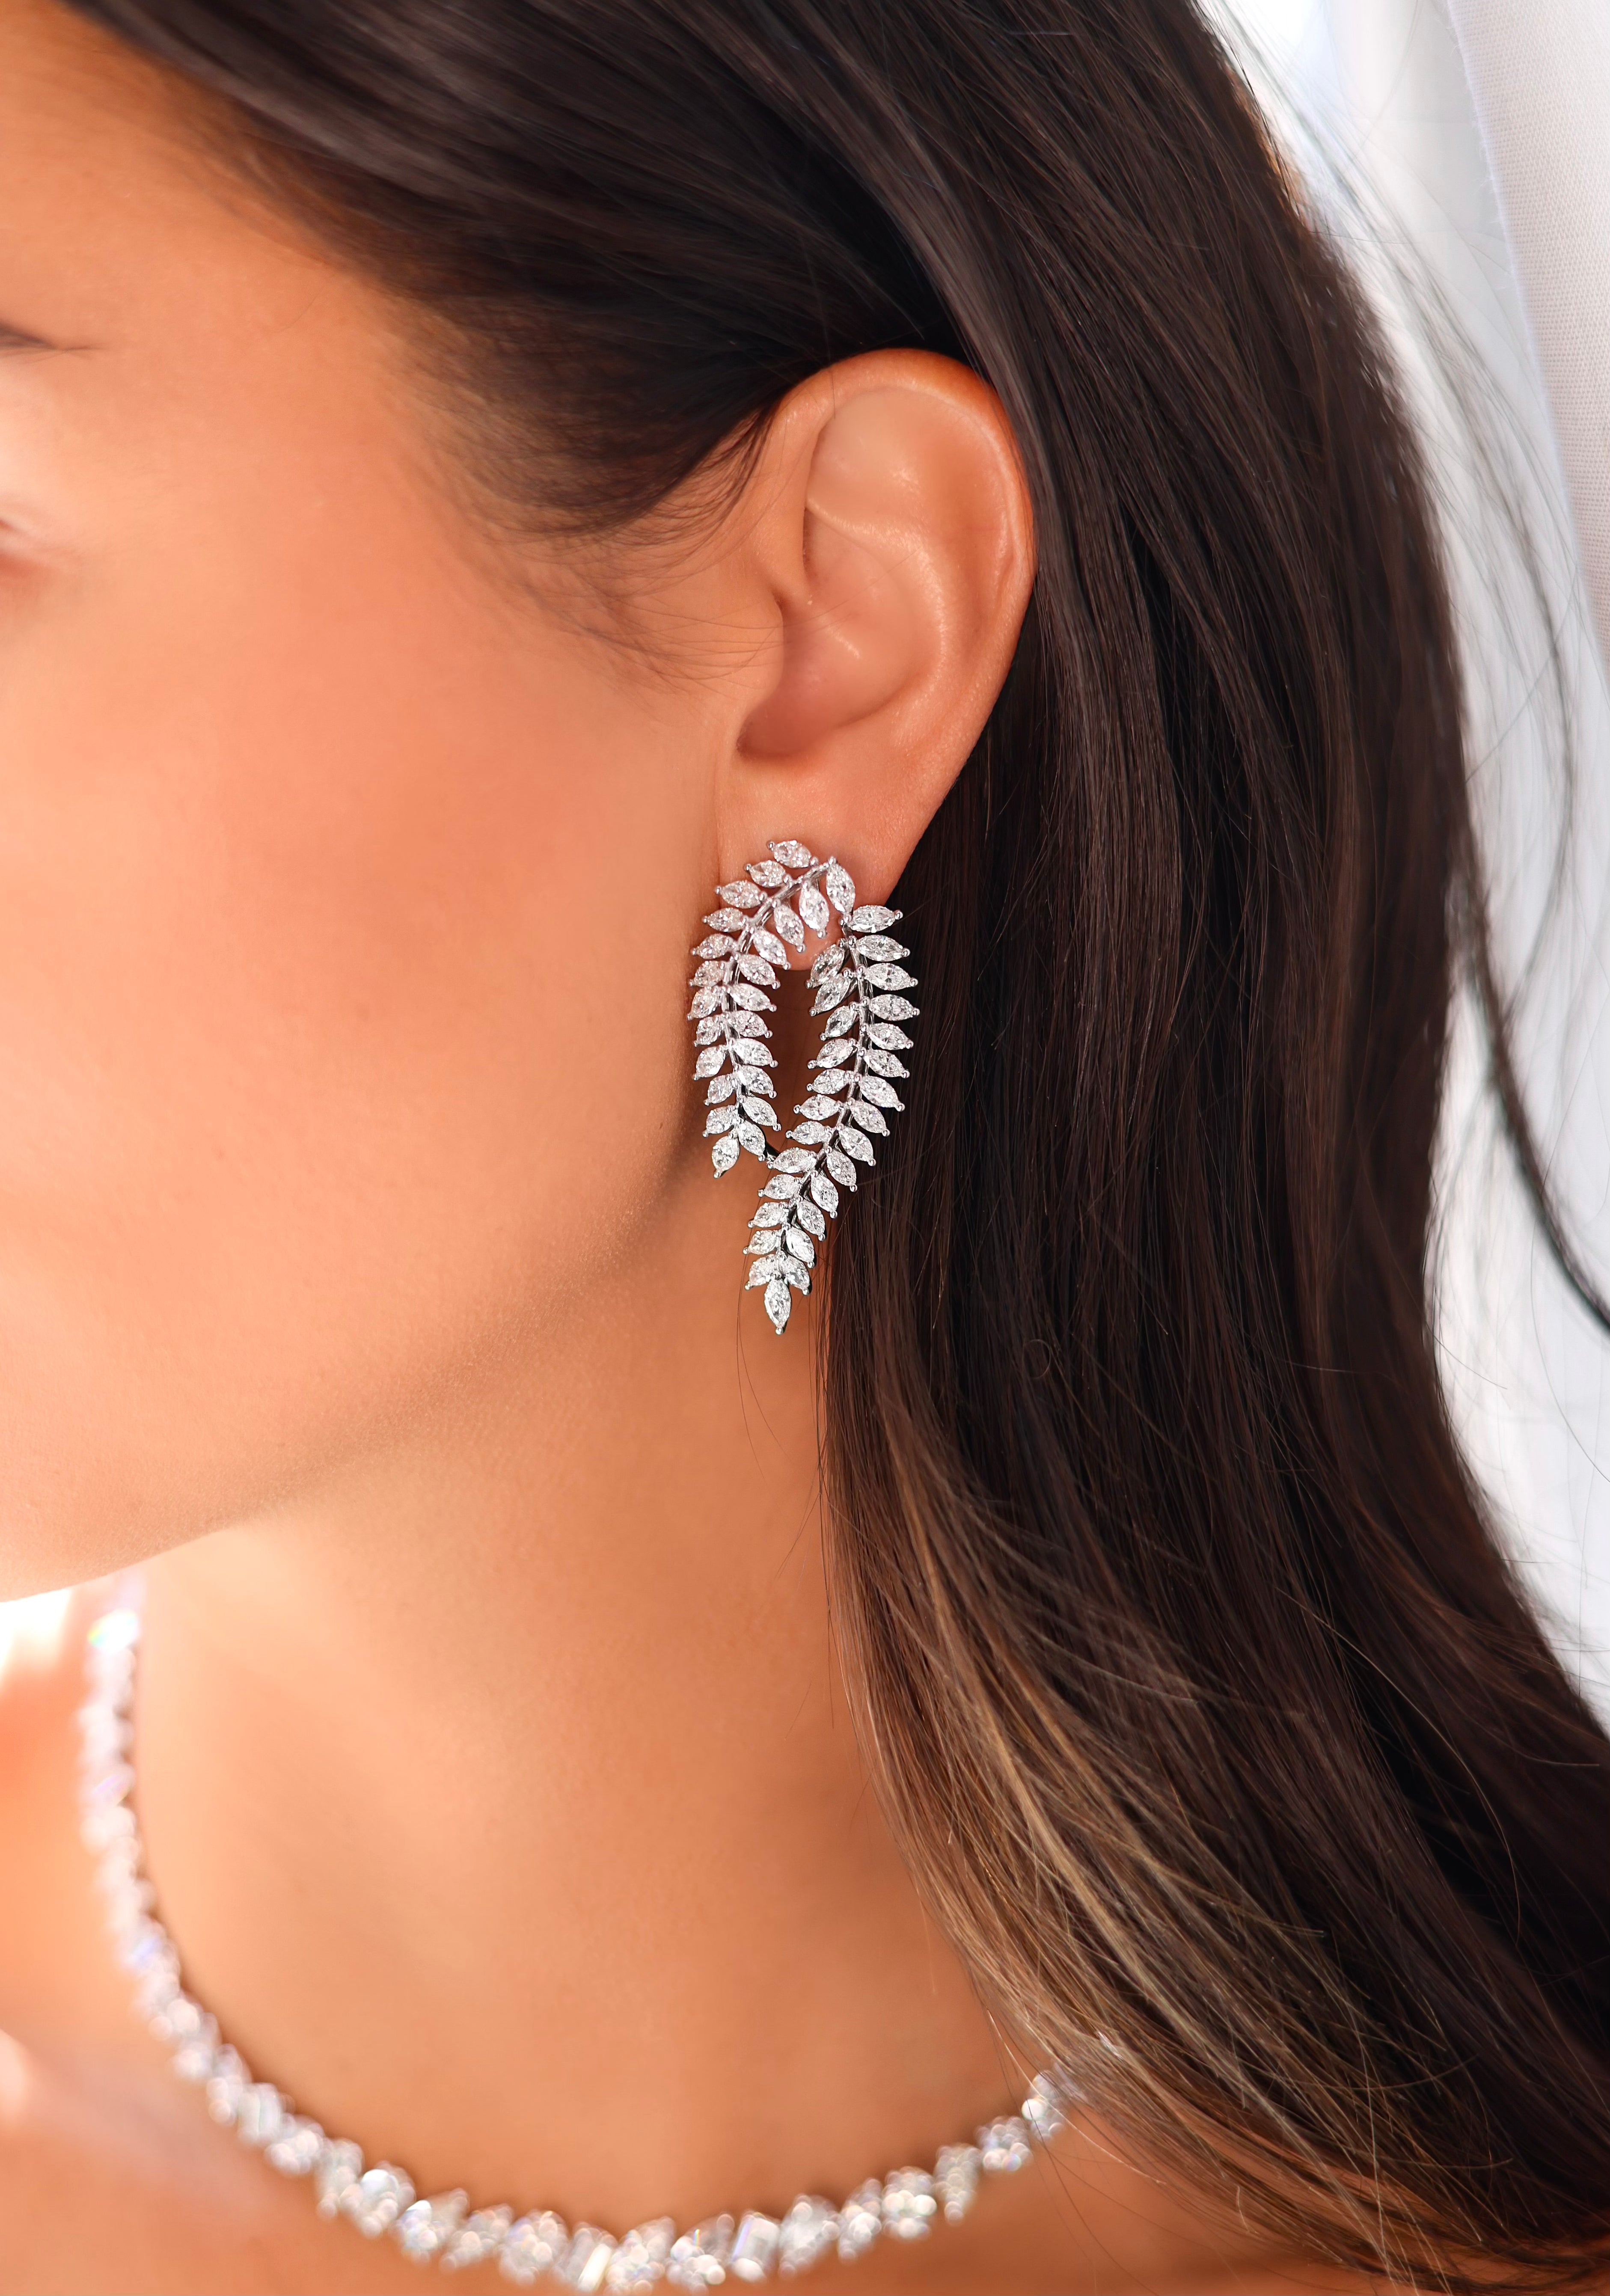 The Athena Luxe Earrings